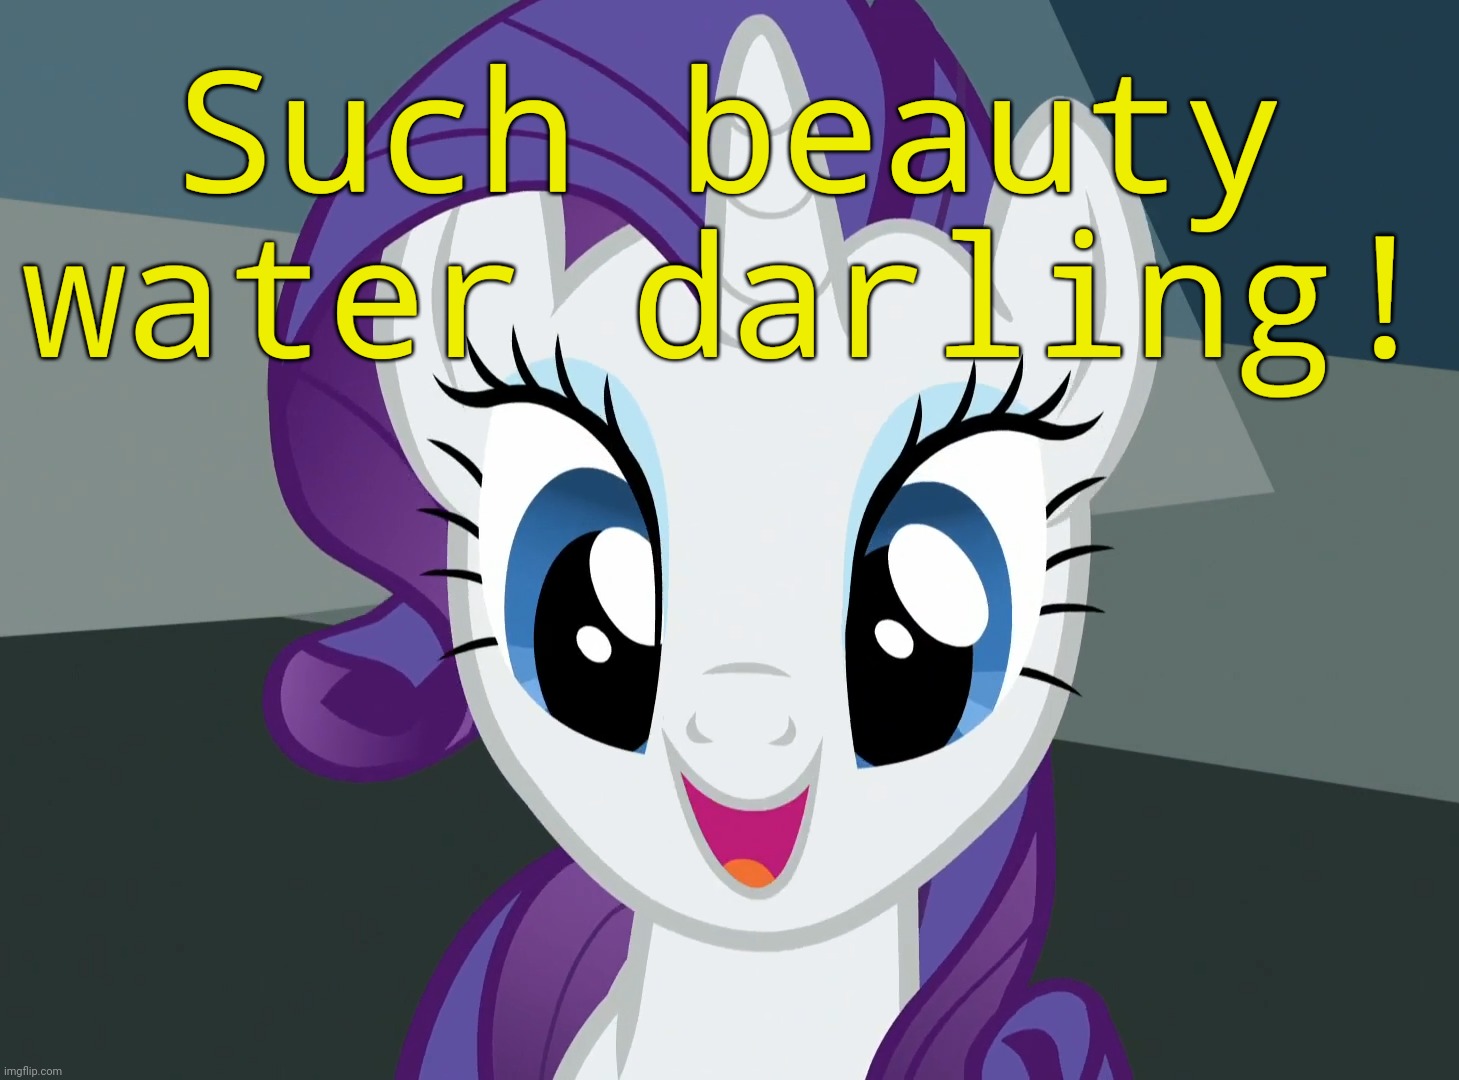 Such beauty water darling! | made w/ Imgflip meme maker